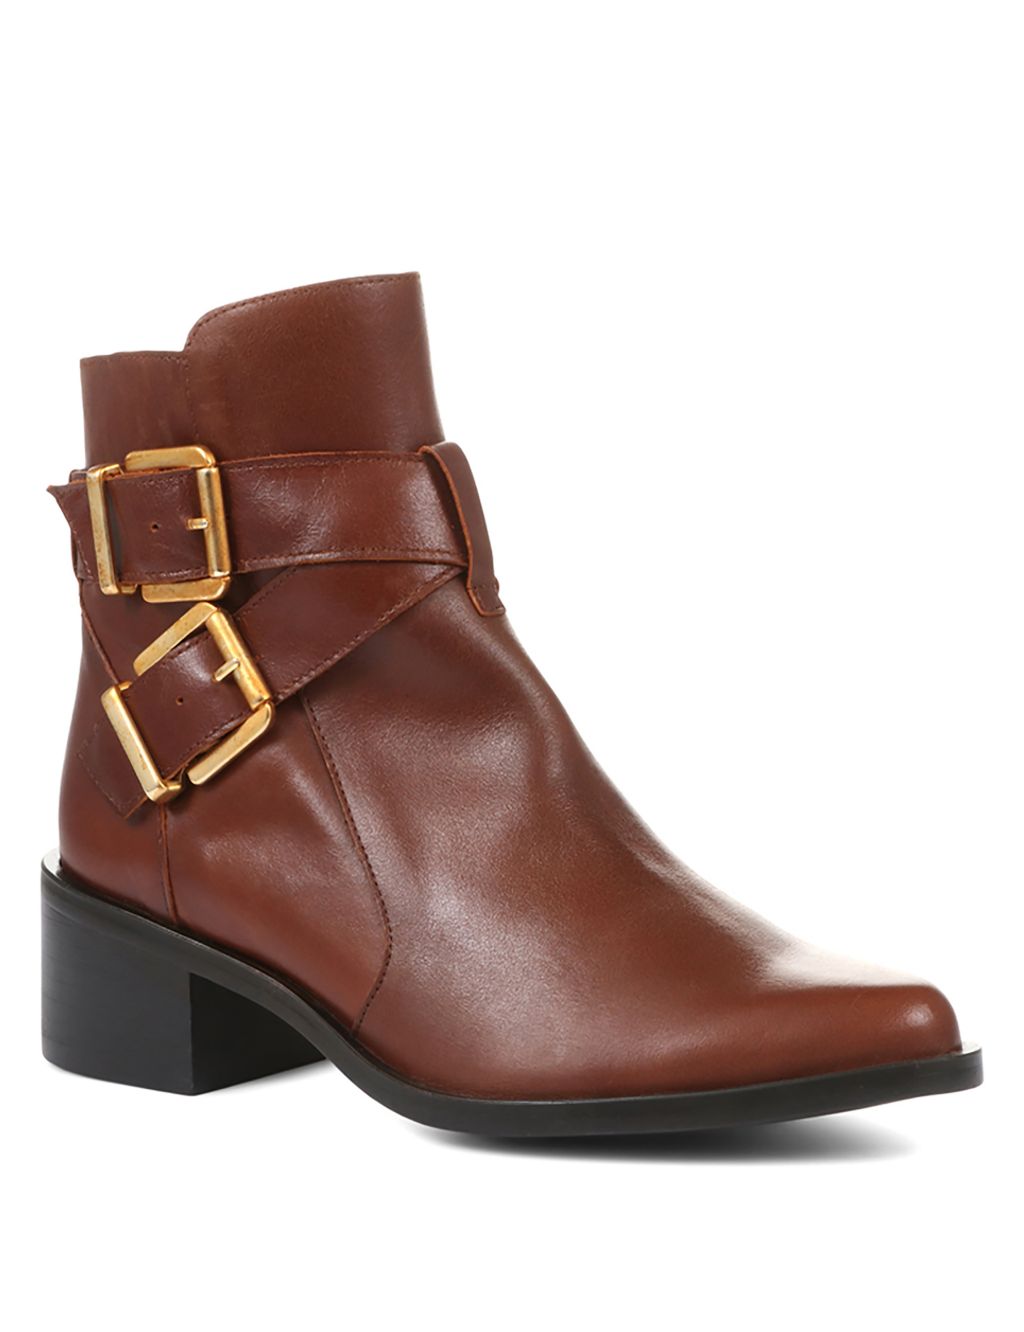 Leather Buckle Block Heel Ankle Boots image 2